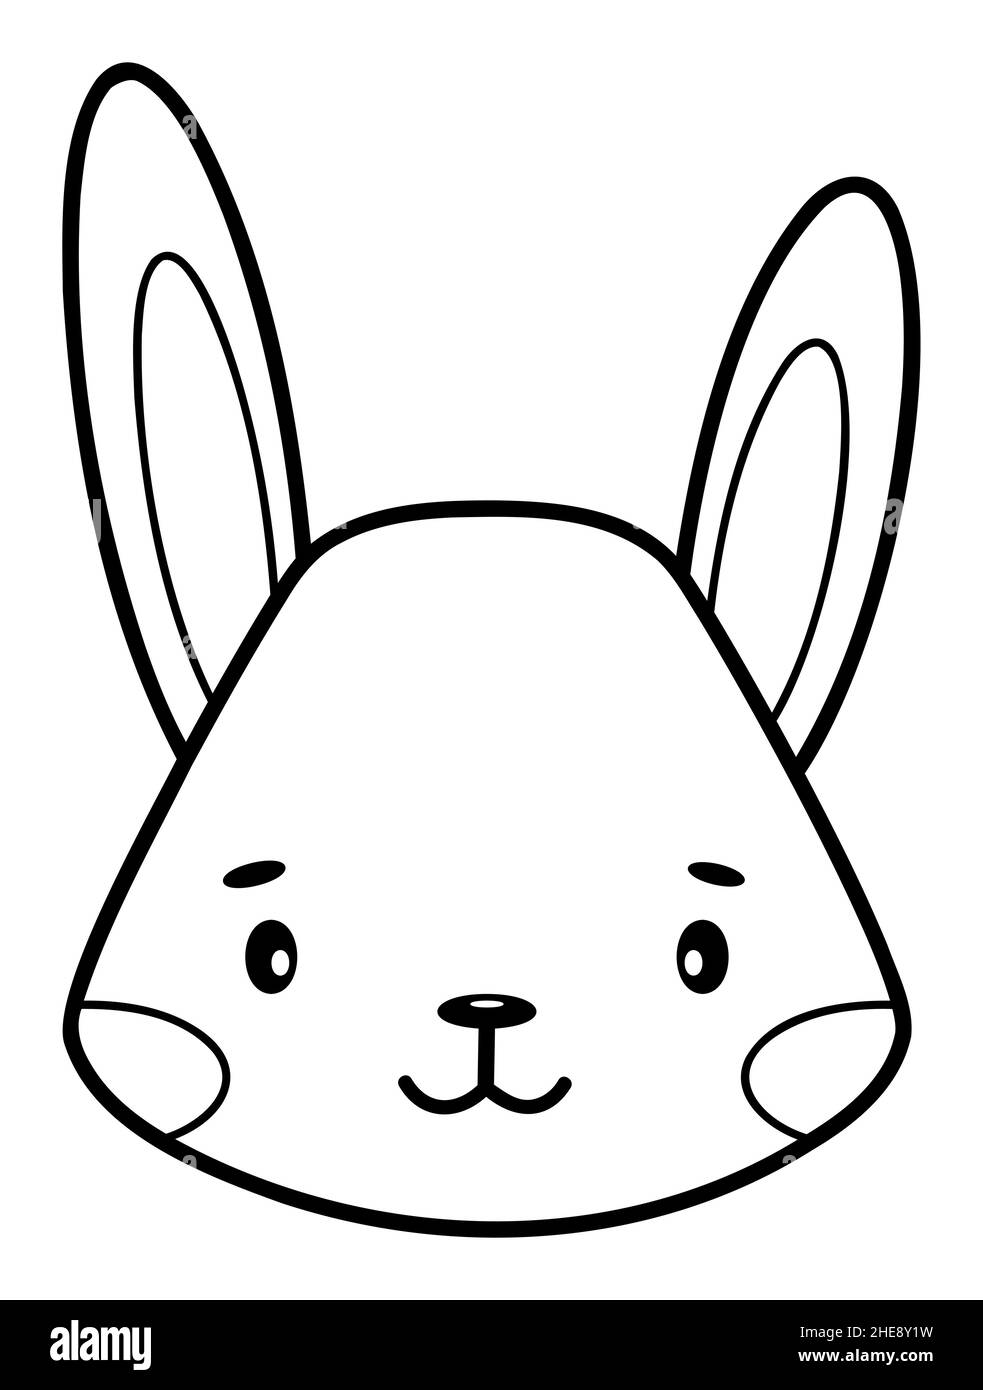 Coloring book or page for kids. Rabbit black and white outline illustration. Stock Vector